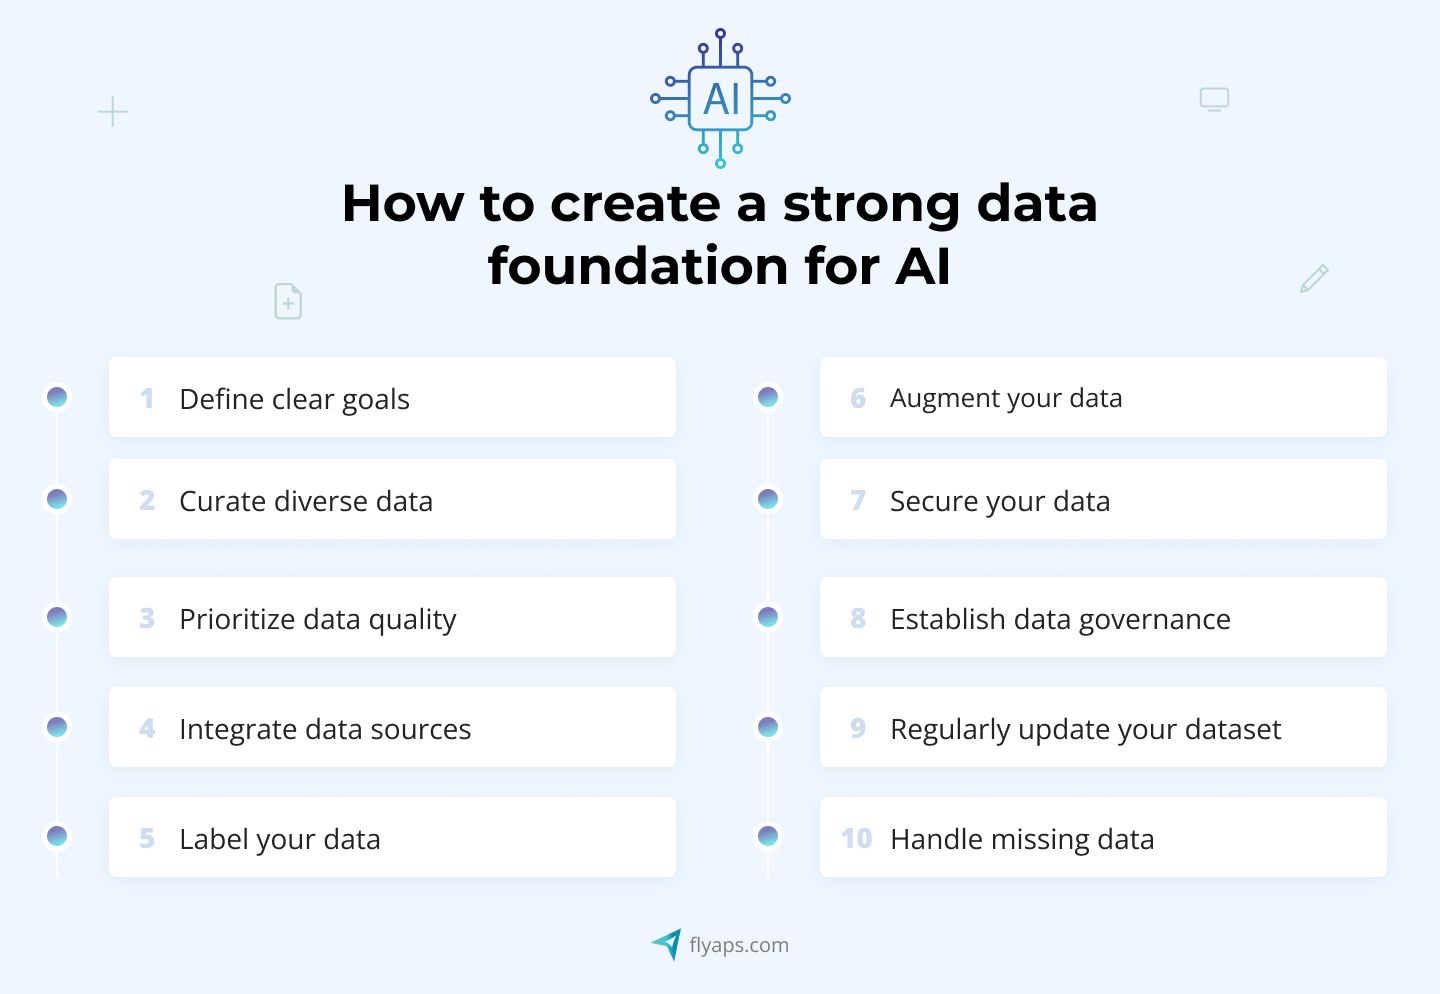 How to create a strong data foundation for AI